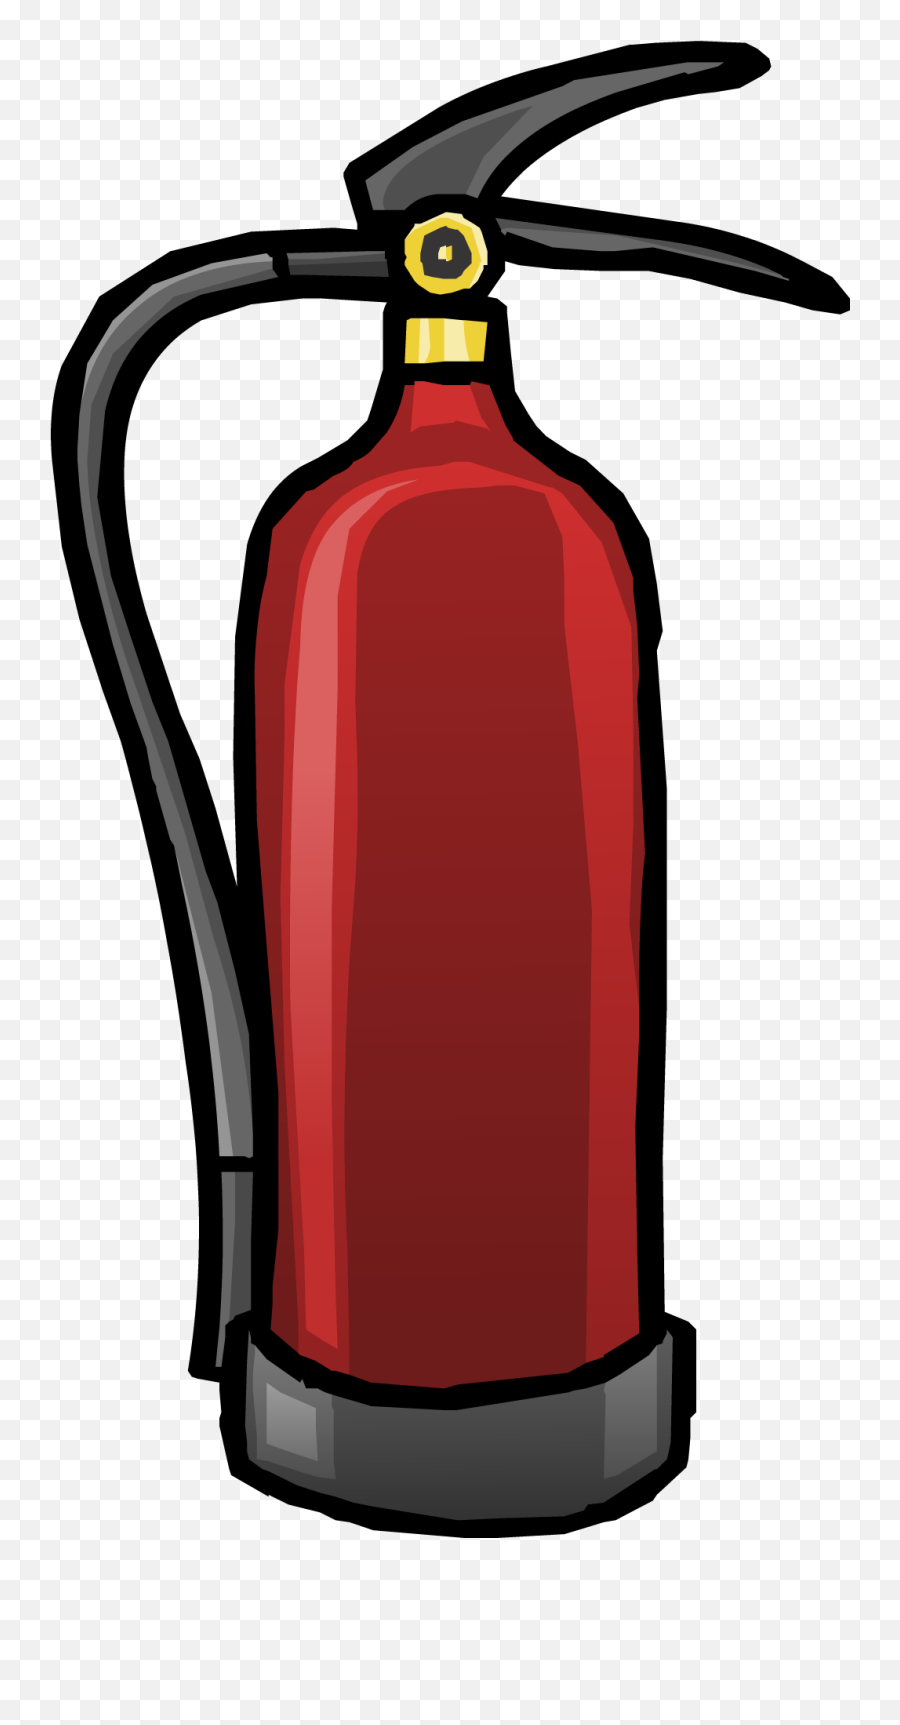 Fire Extinguisher Image Png Clipart - Fire Extinguisher Sprite Emoji,Fire Extinguisher Clipart